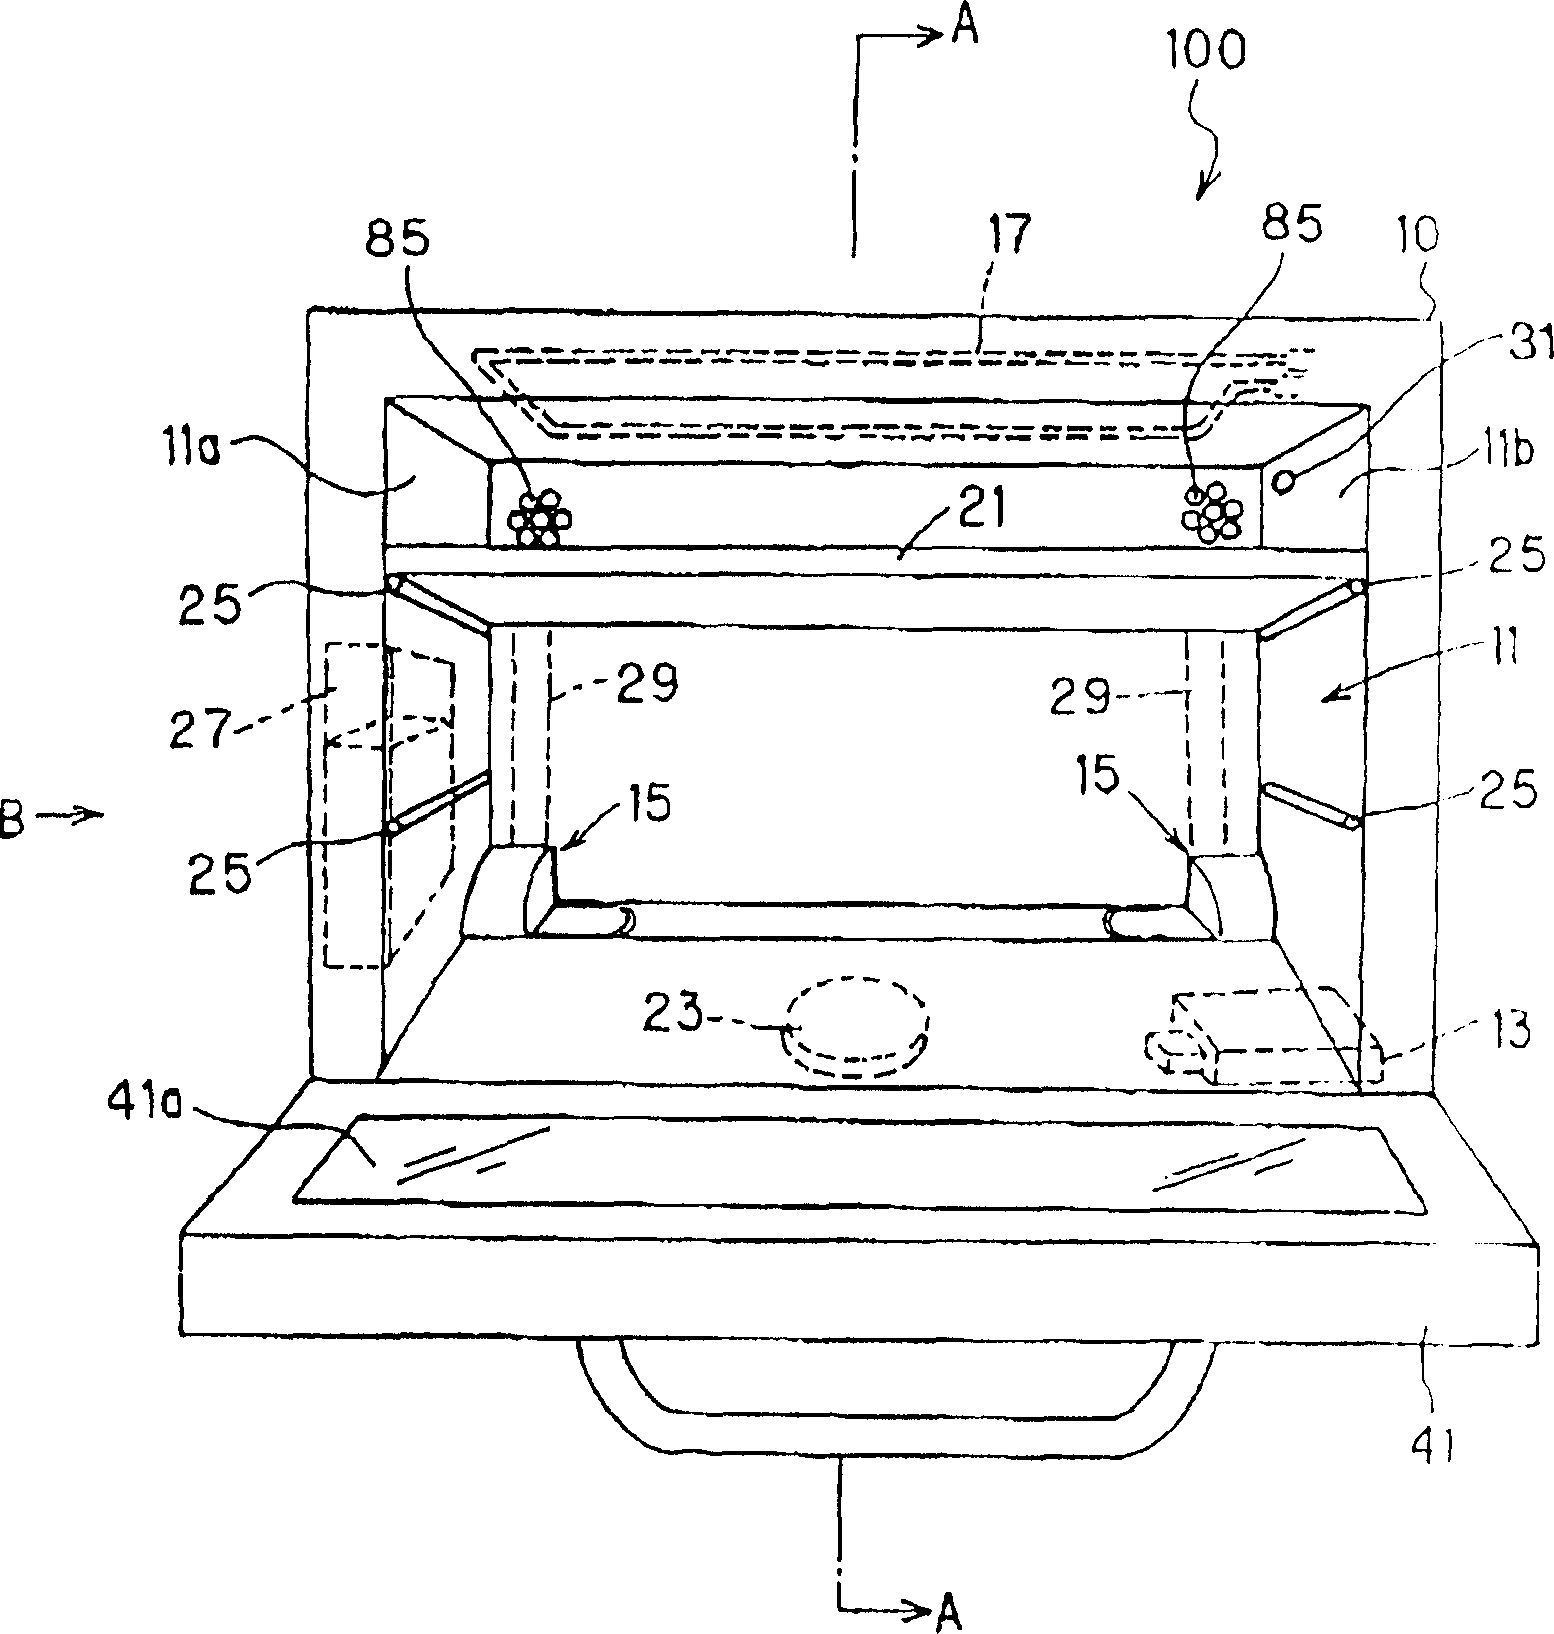 High frequency heating apparatus having a steam generating function